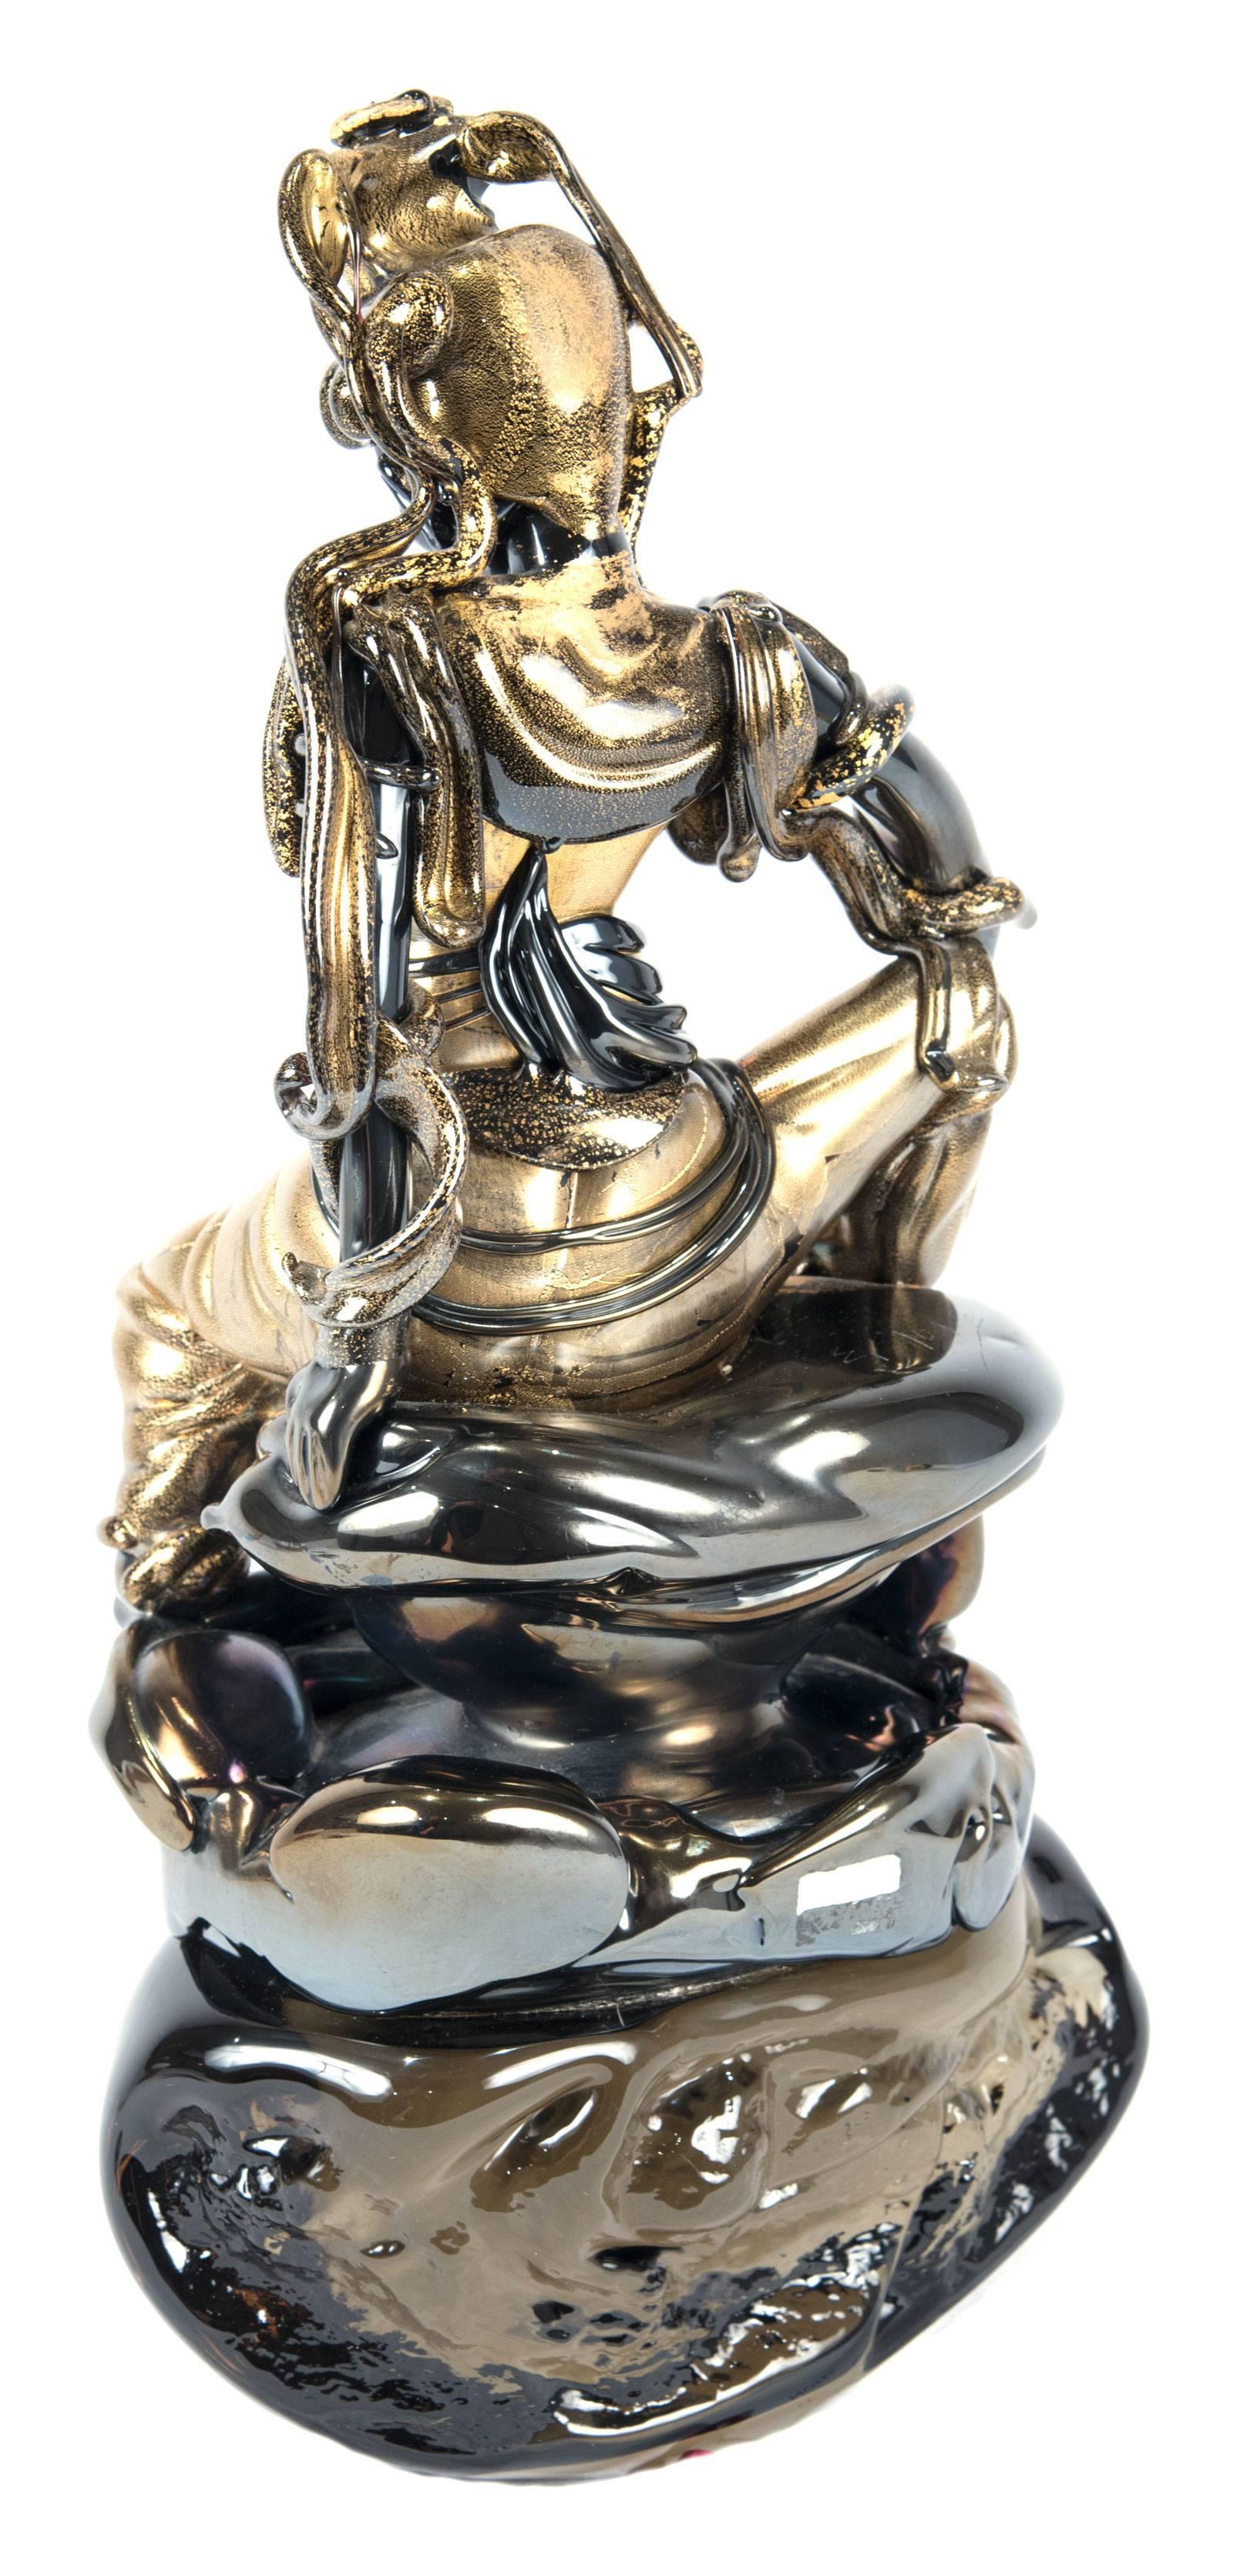 An iridescent glass sculpture made in Murano, Italy depicting the figure of Pavarti, the consort of Shiva, sitting on a naturalistic base, dressed in flowing robes and an elaborate headpiece with long tendrils.